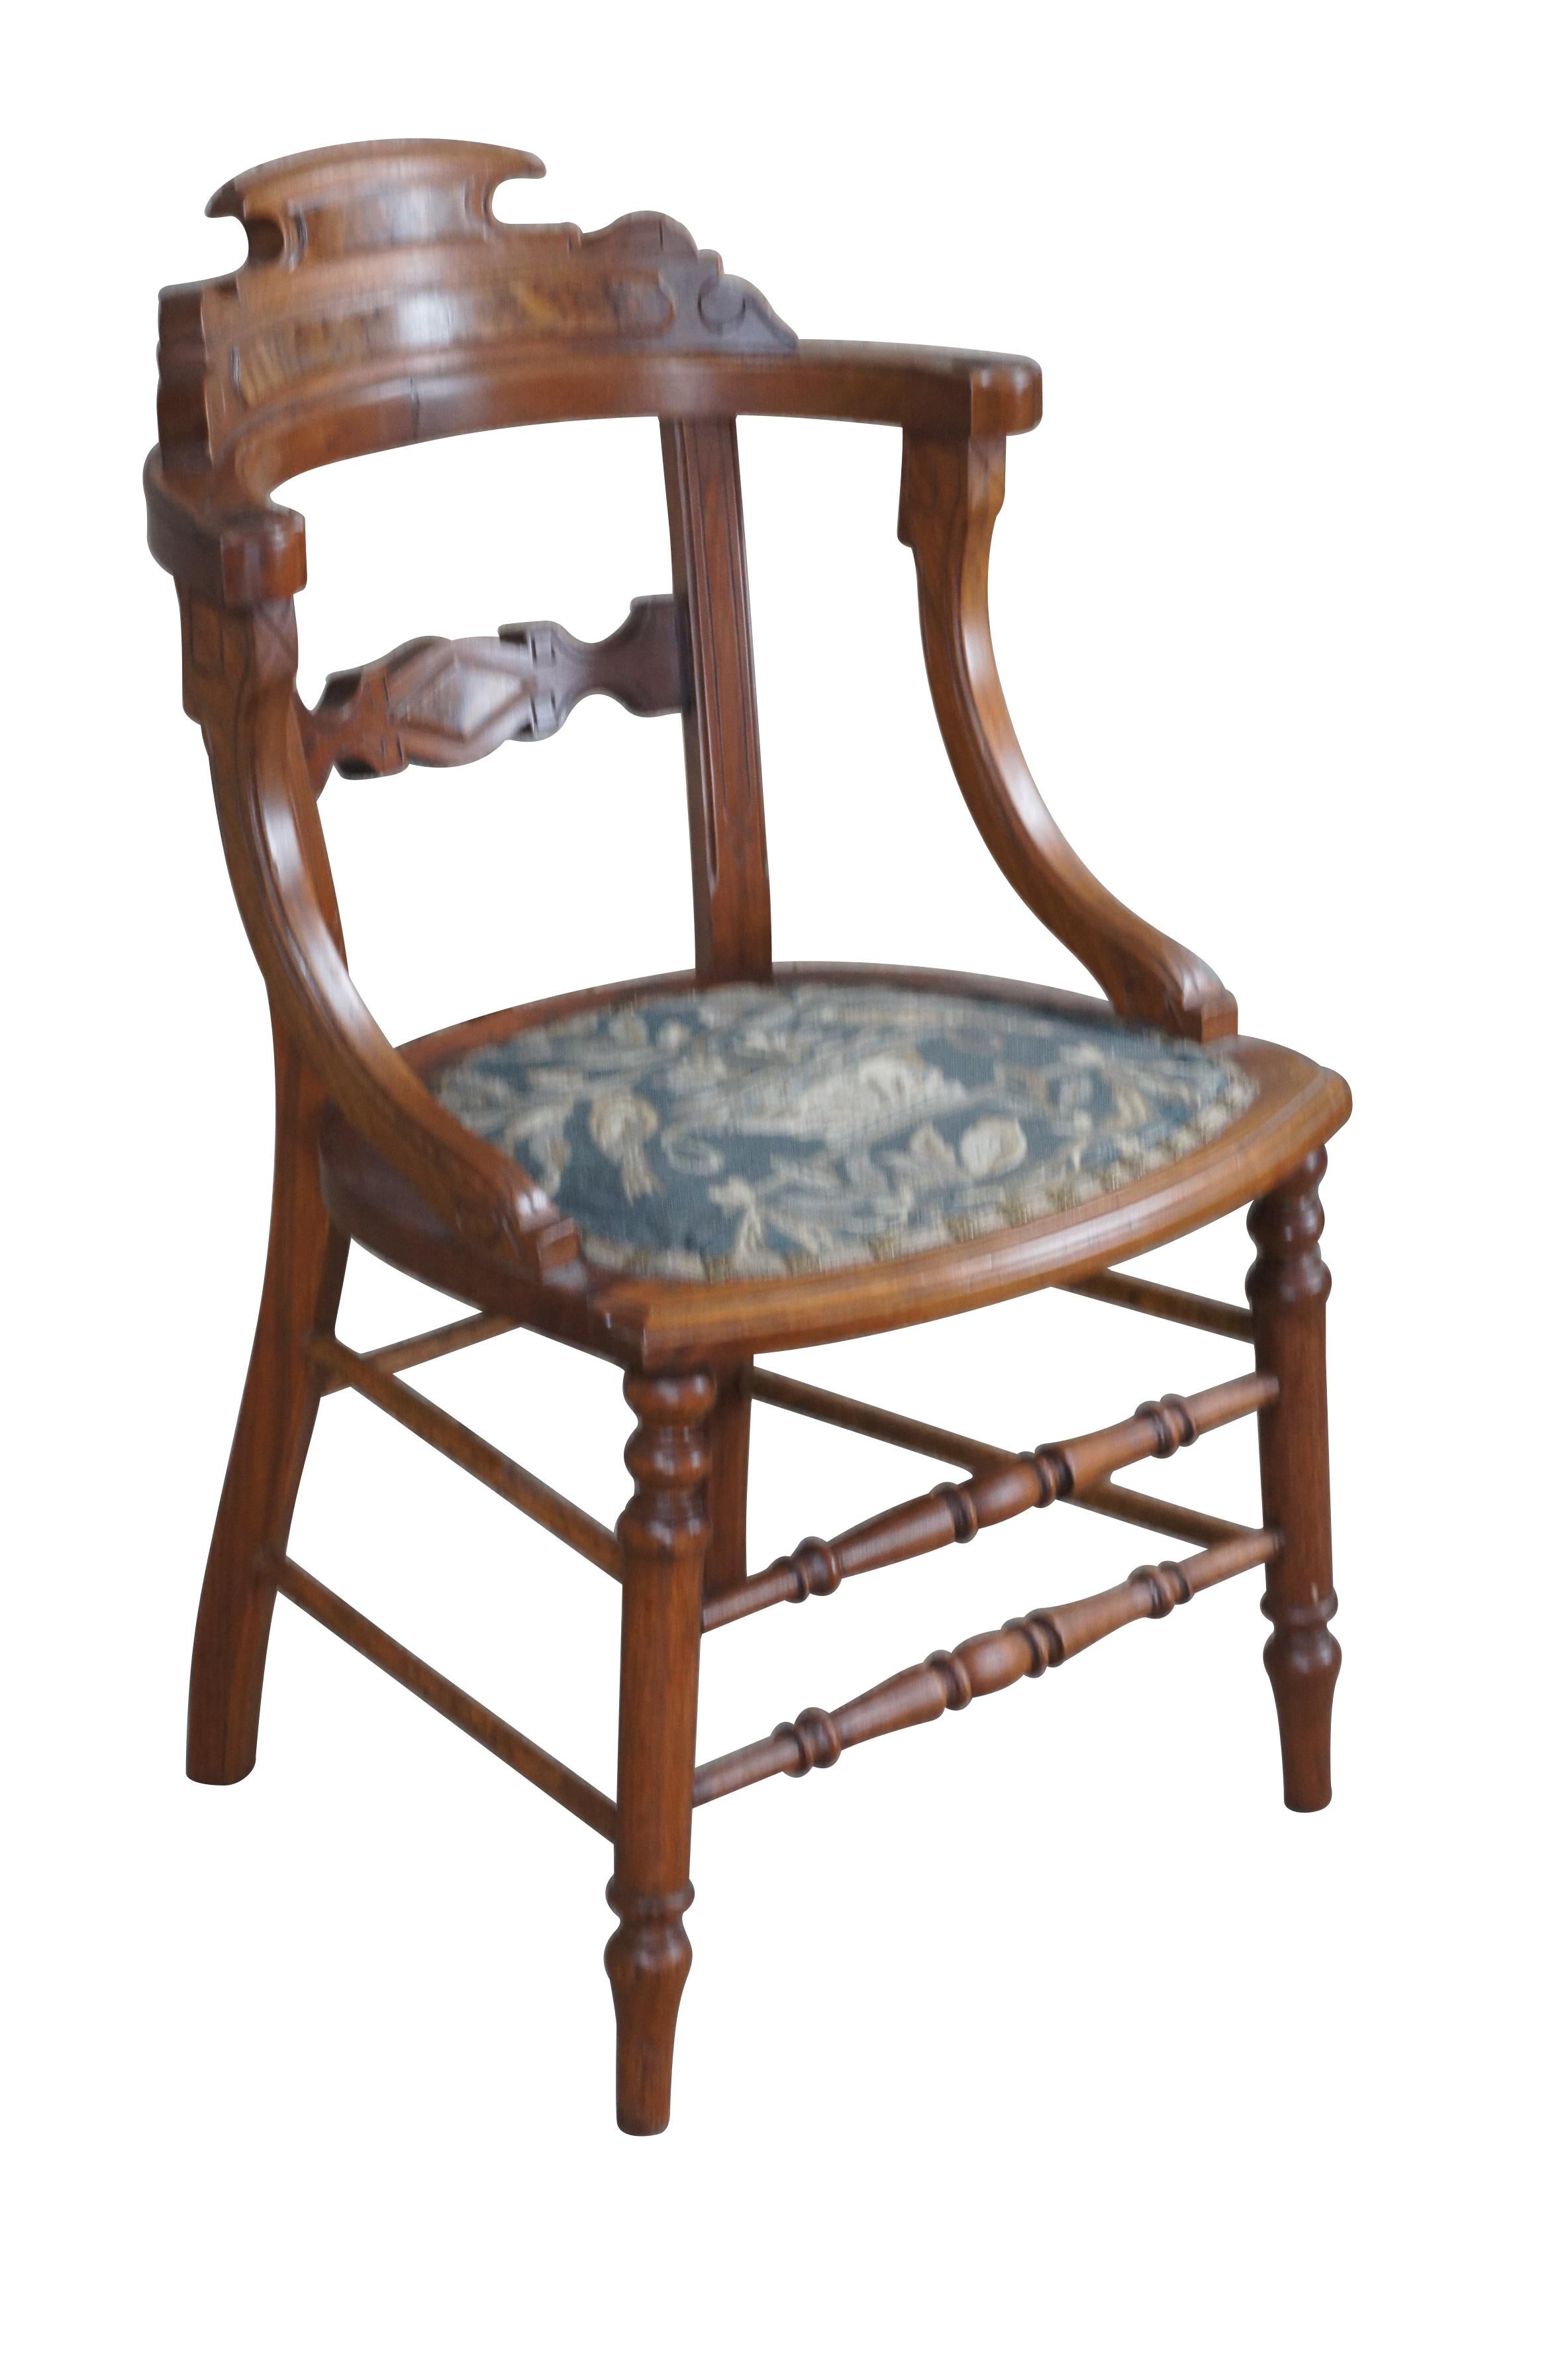 A quaint late 19th century Renaissance Revival side chair.  Made from walnut with burled panels.  Features a curved back with downswept arms and embroidered seat. Seat features a scene of birds and flowers with ornate metal fasteners on the cording.